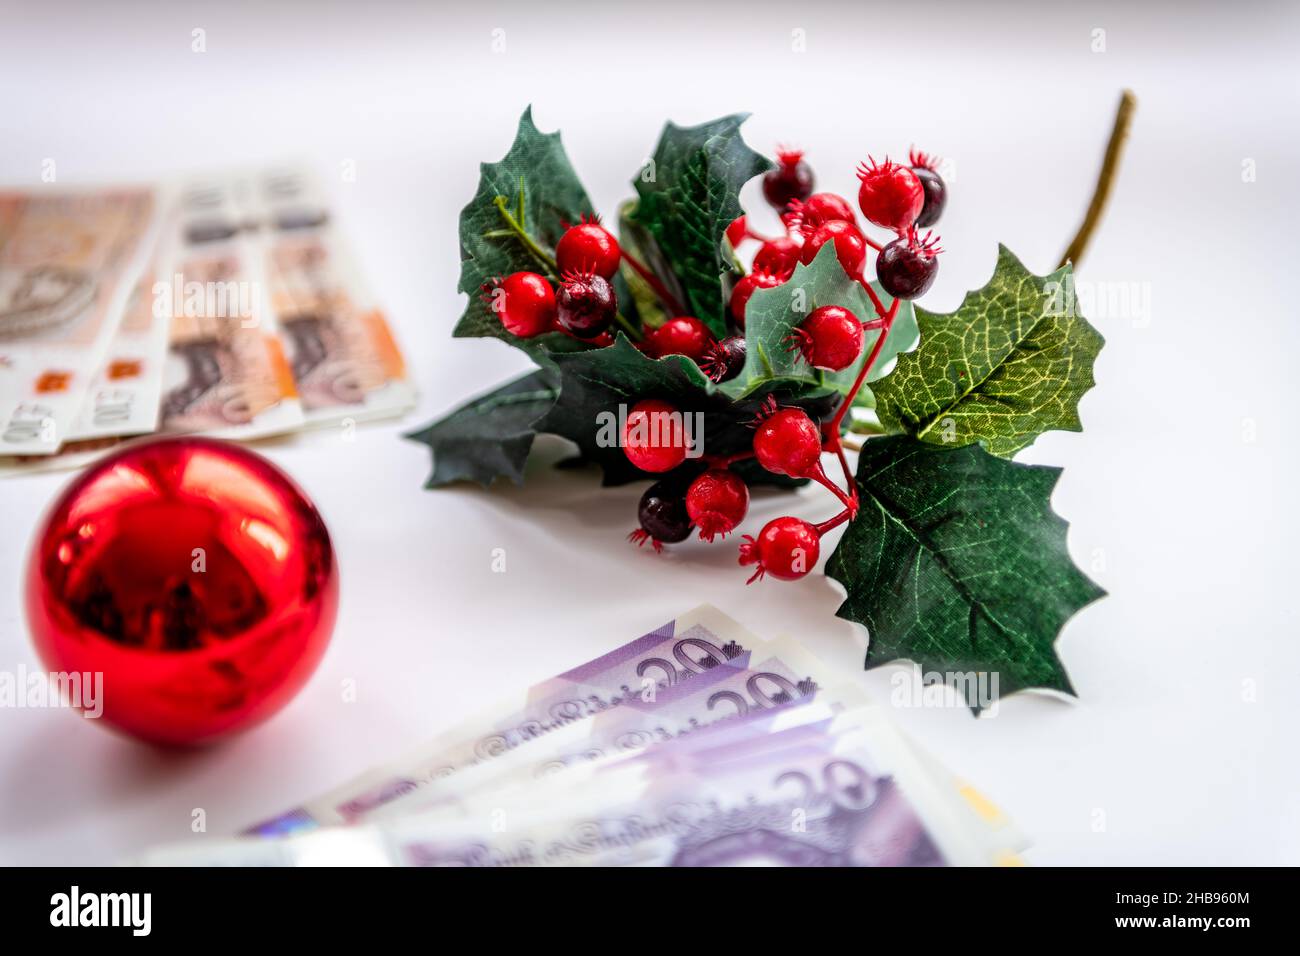 Christmas decorations with bunches of money bank notes isolated. Financial cost of Christmas concept, background. Stock Photo